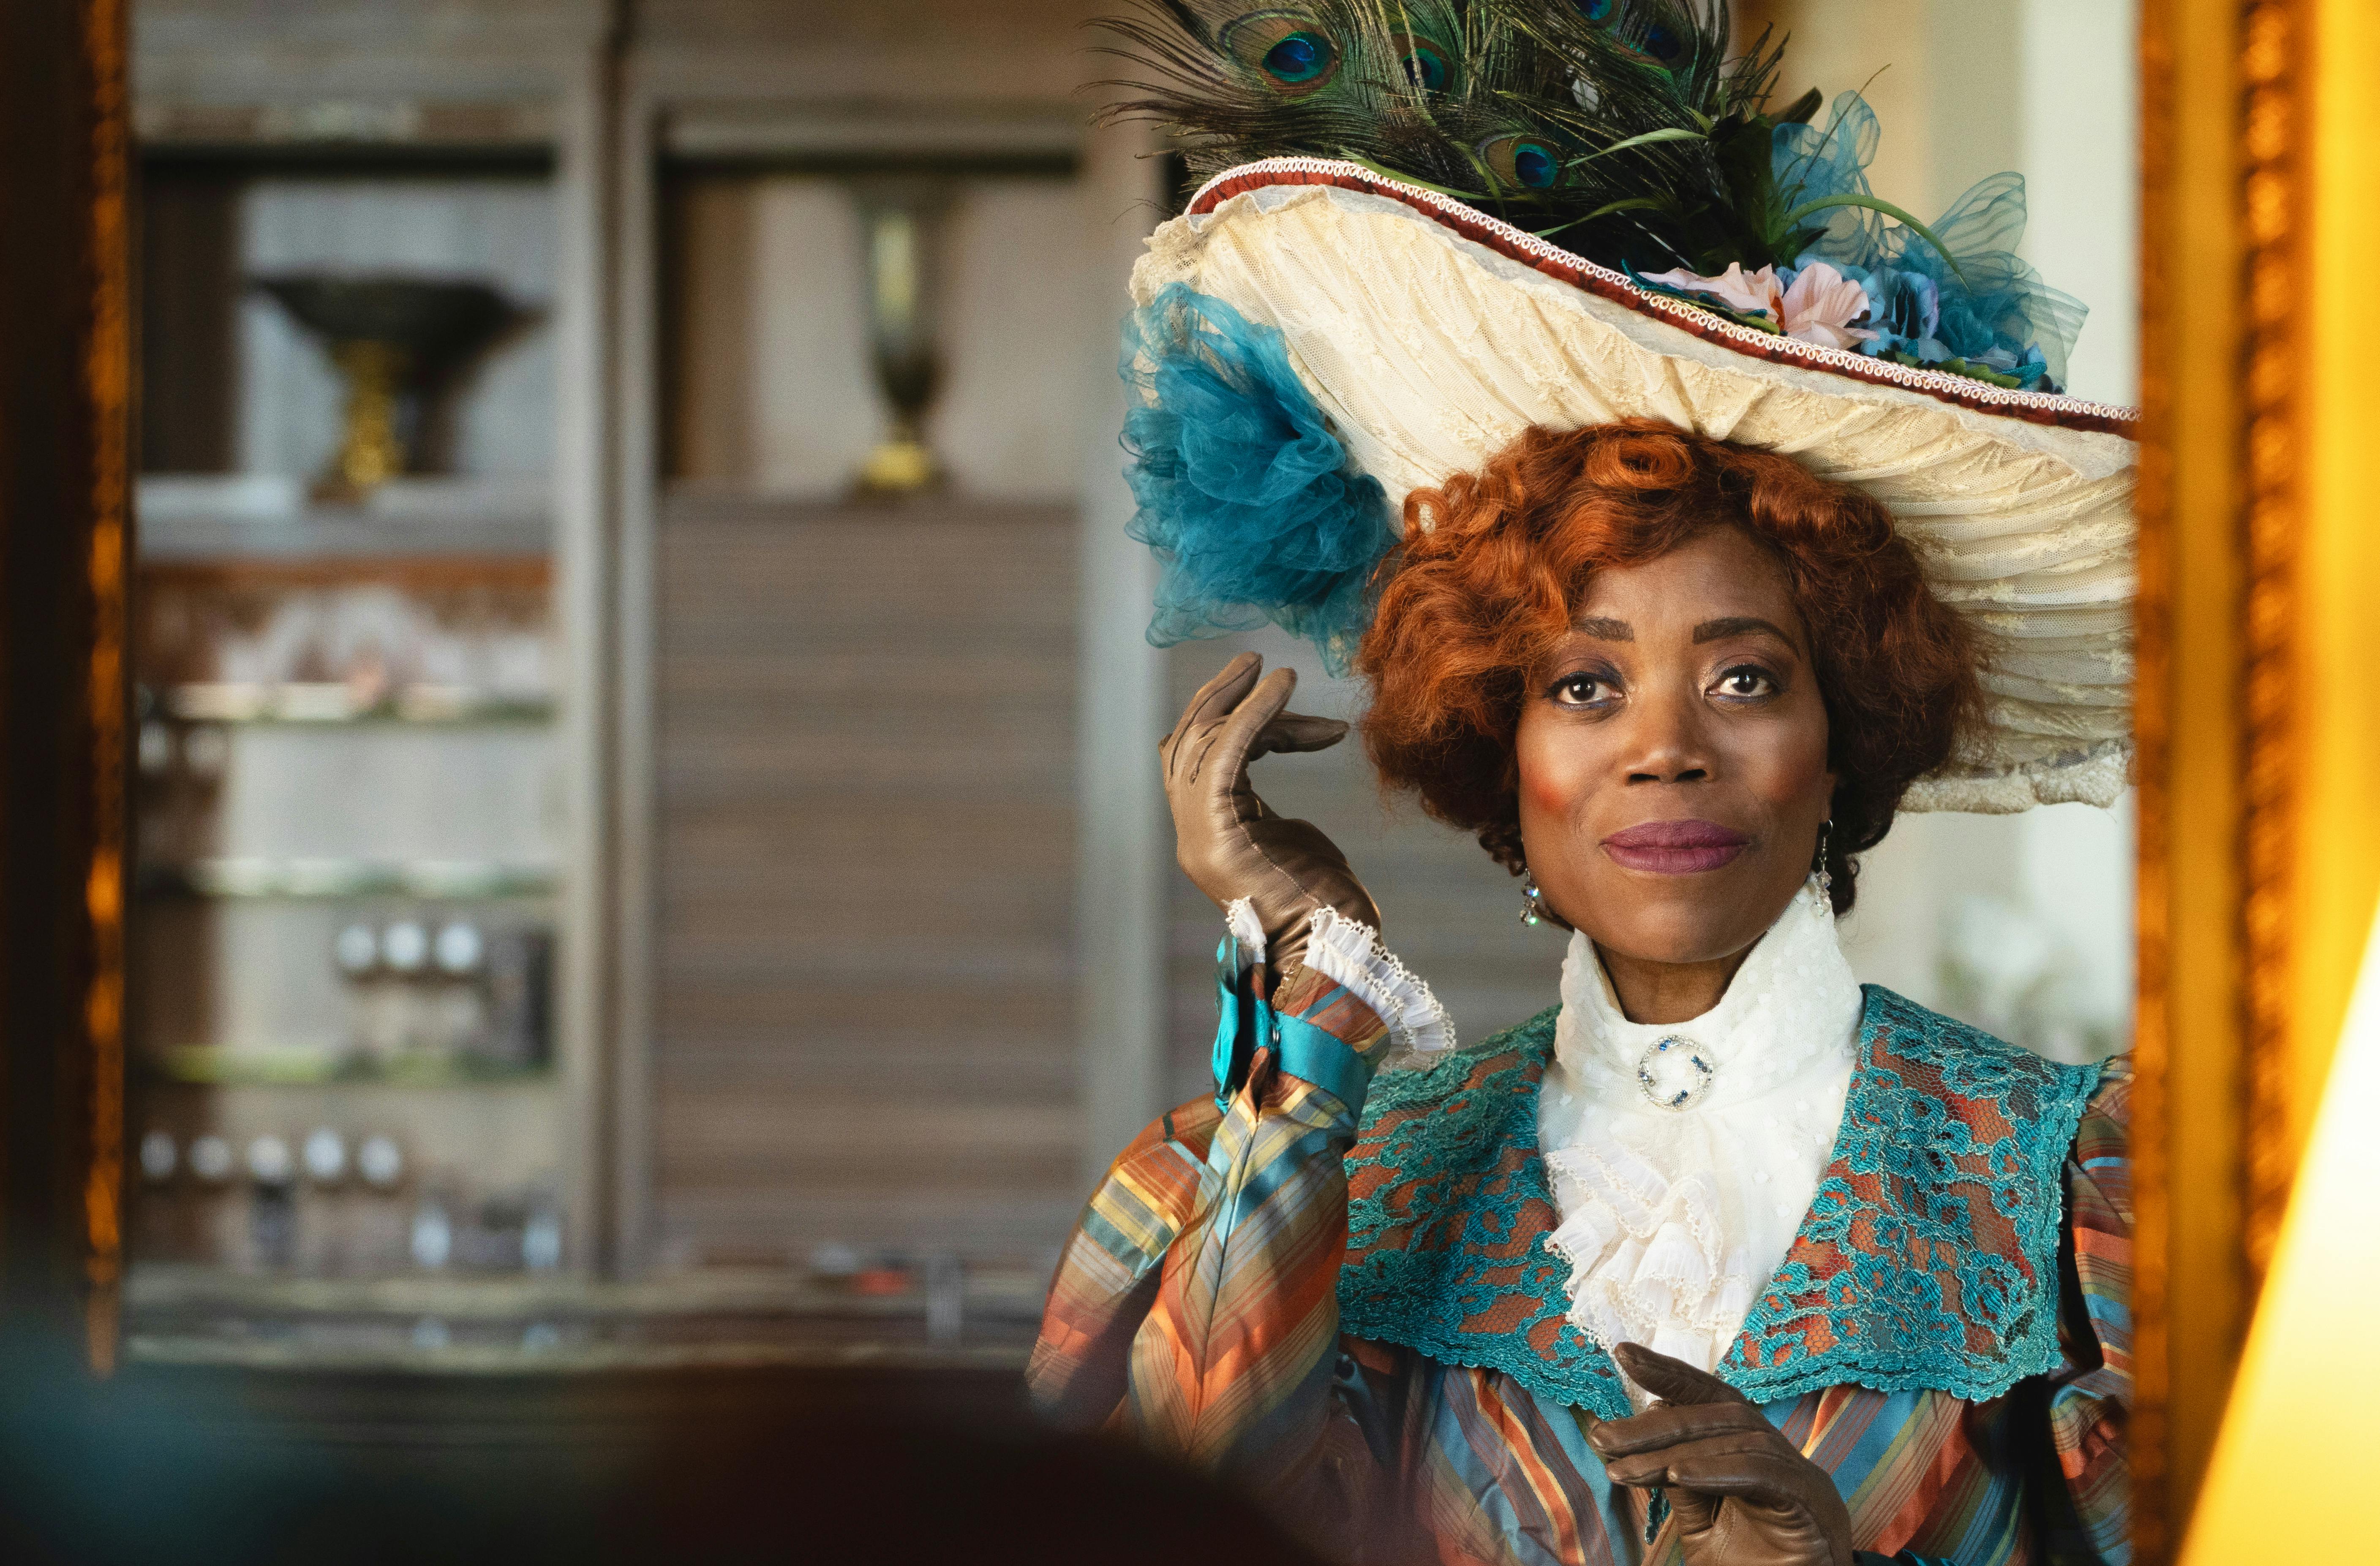 Latté Da's 'Hello Dolly!' centers the Black people the show usually ignores